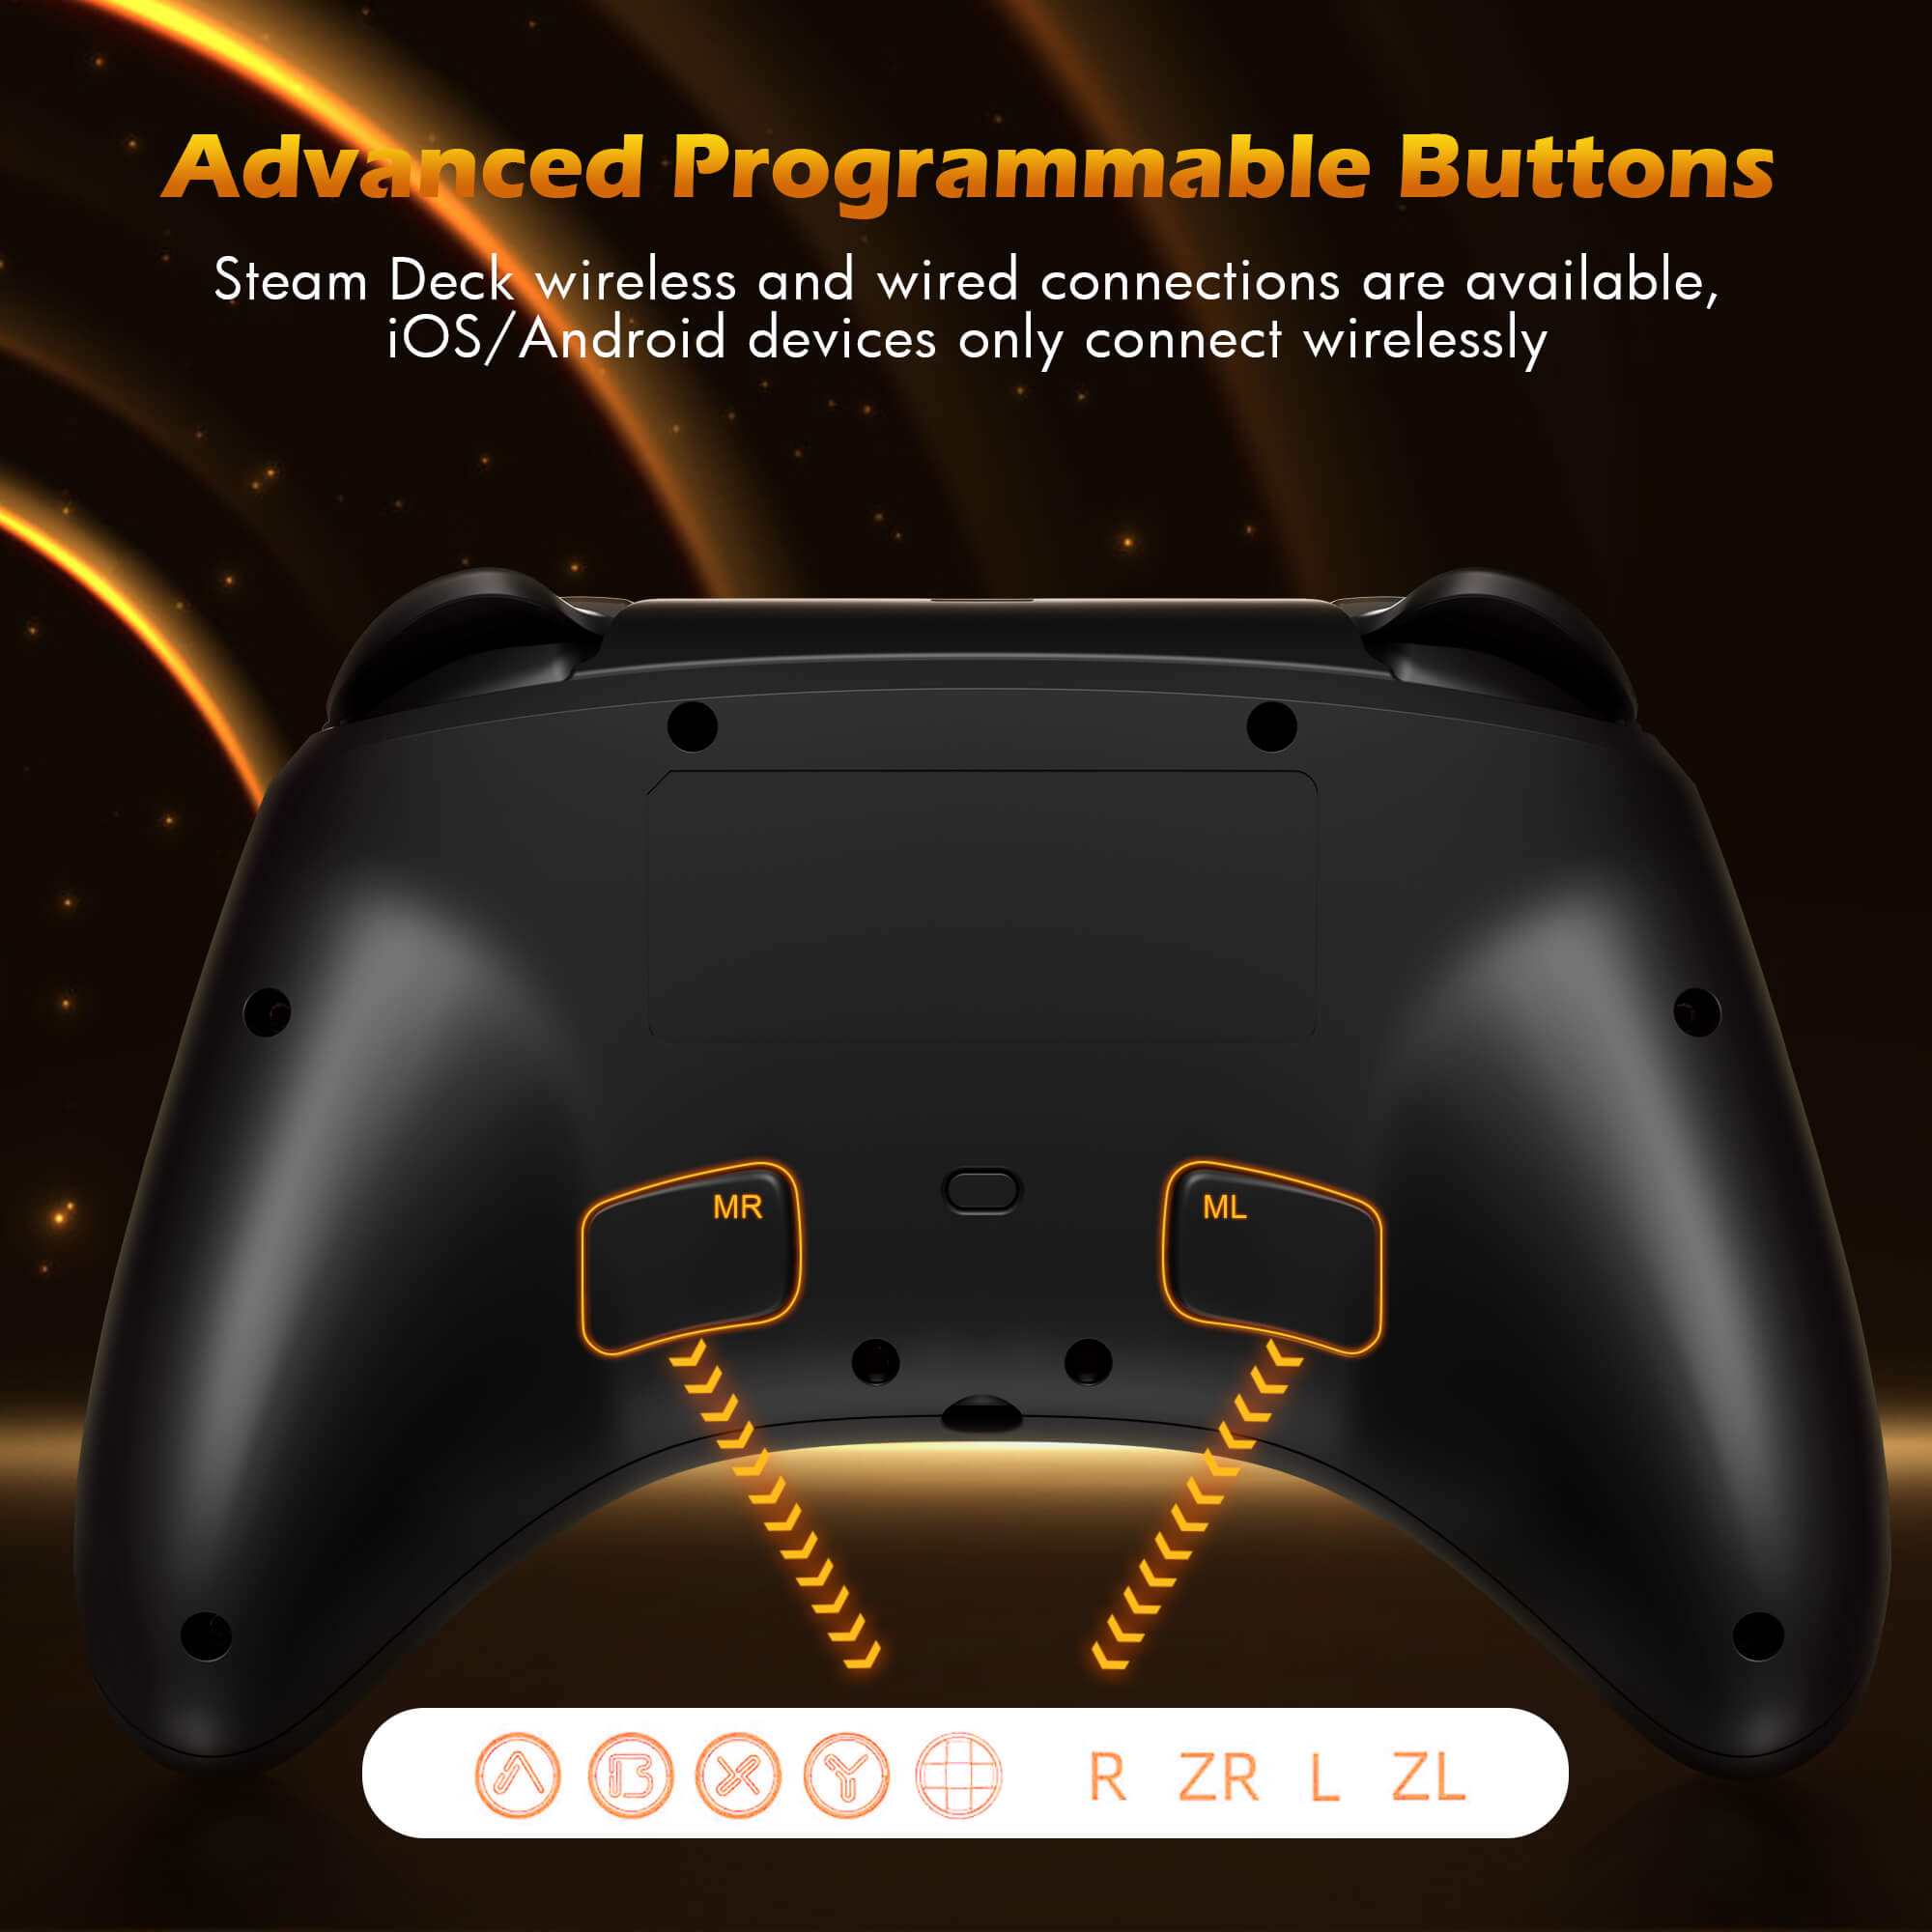 CONNECT NINTENDO SWITCH PRO CONTROLLER TO ANDROID 